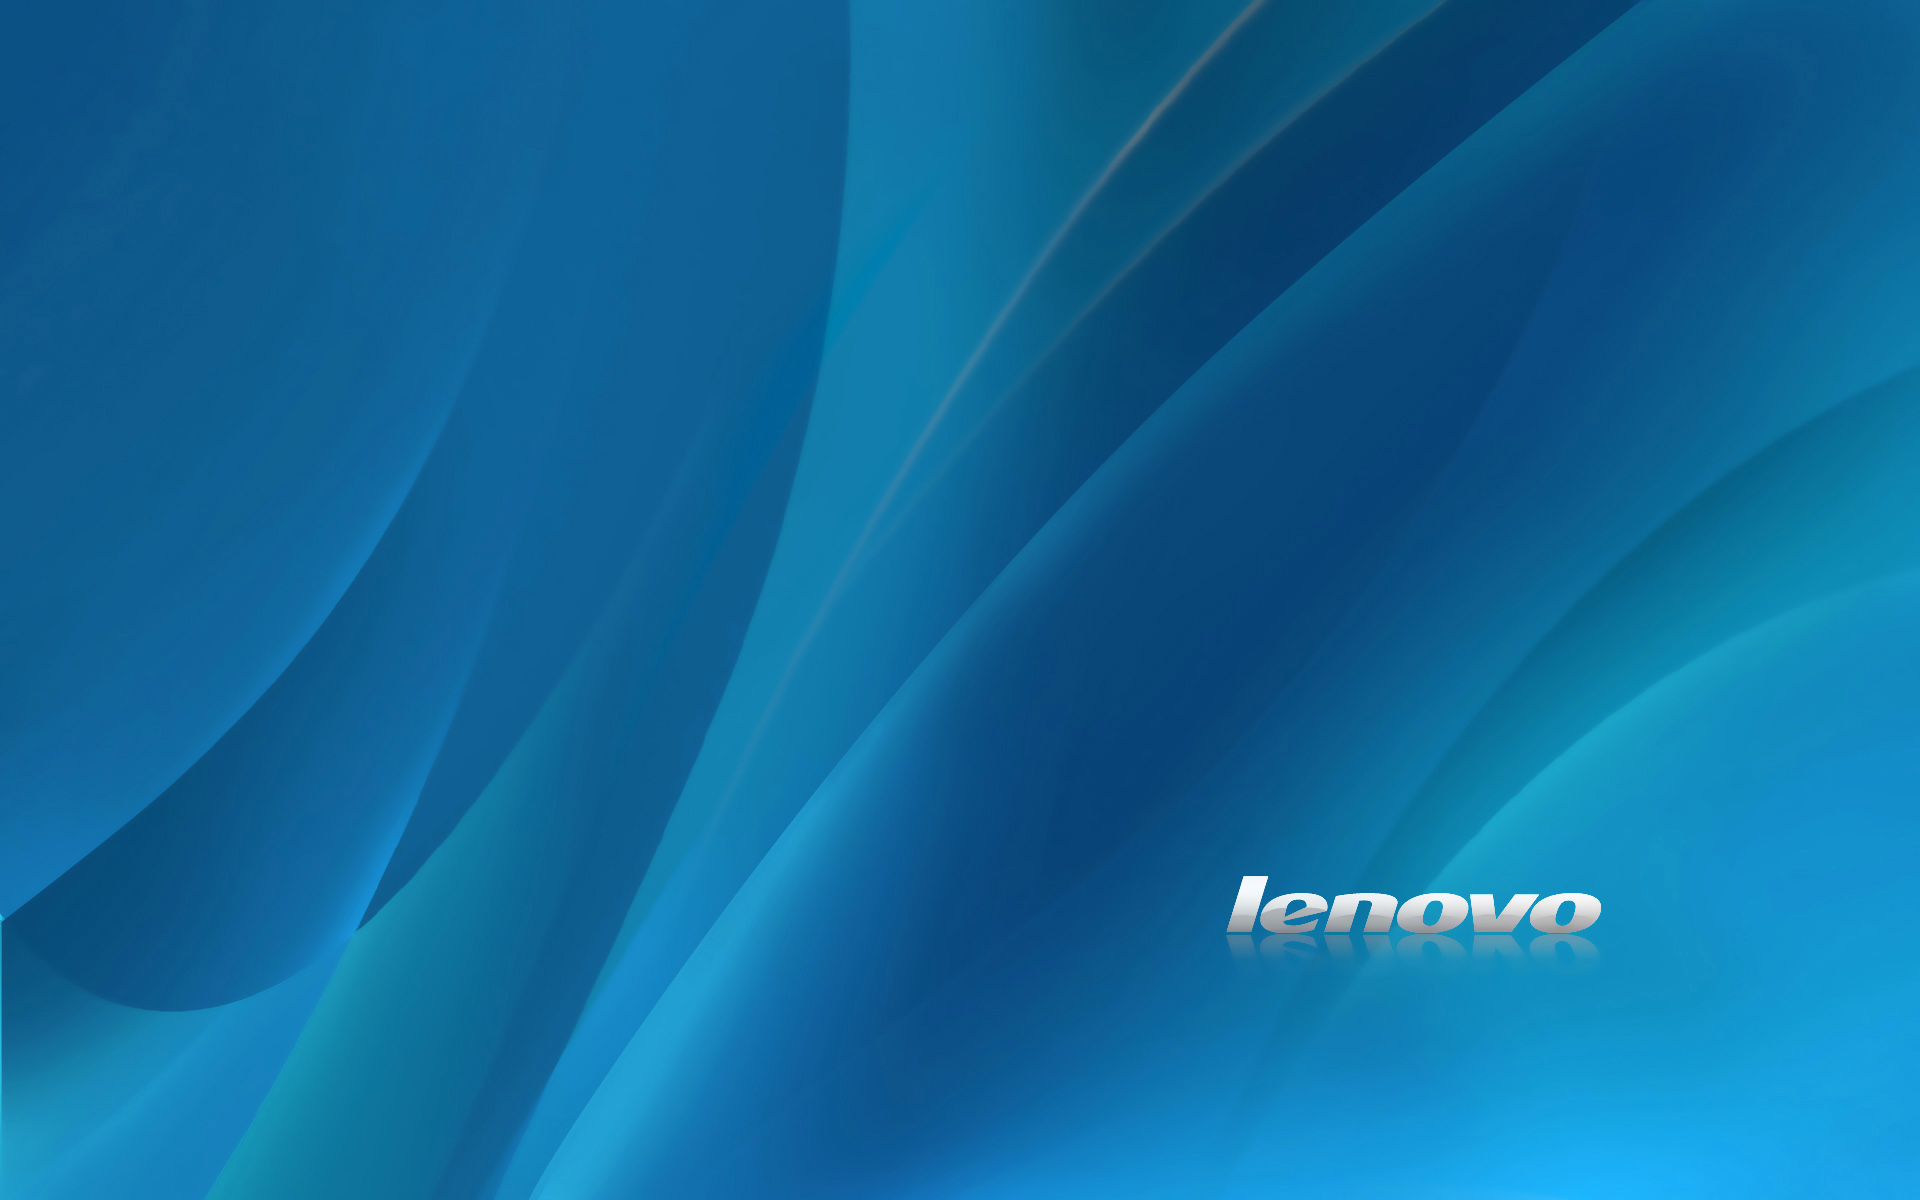 Your Lenovo Wallpaper Then Right Click And Save As You Will Now